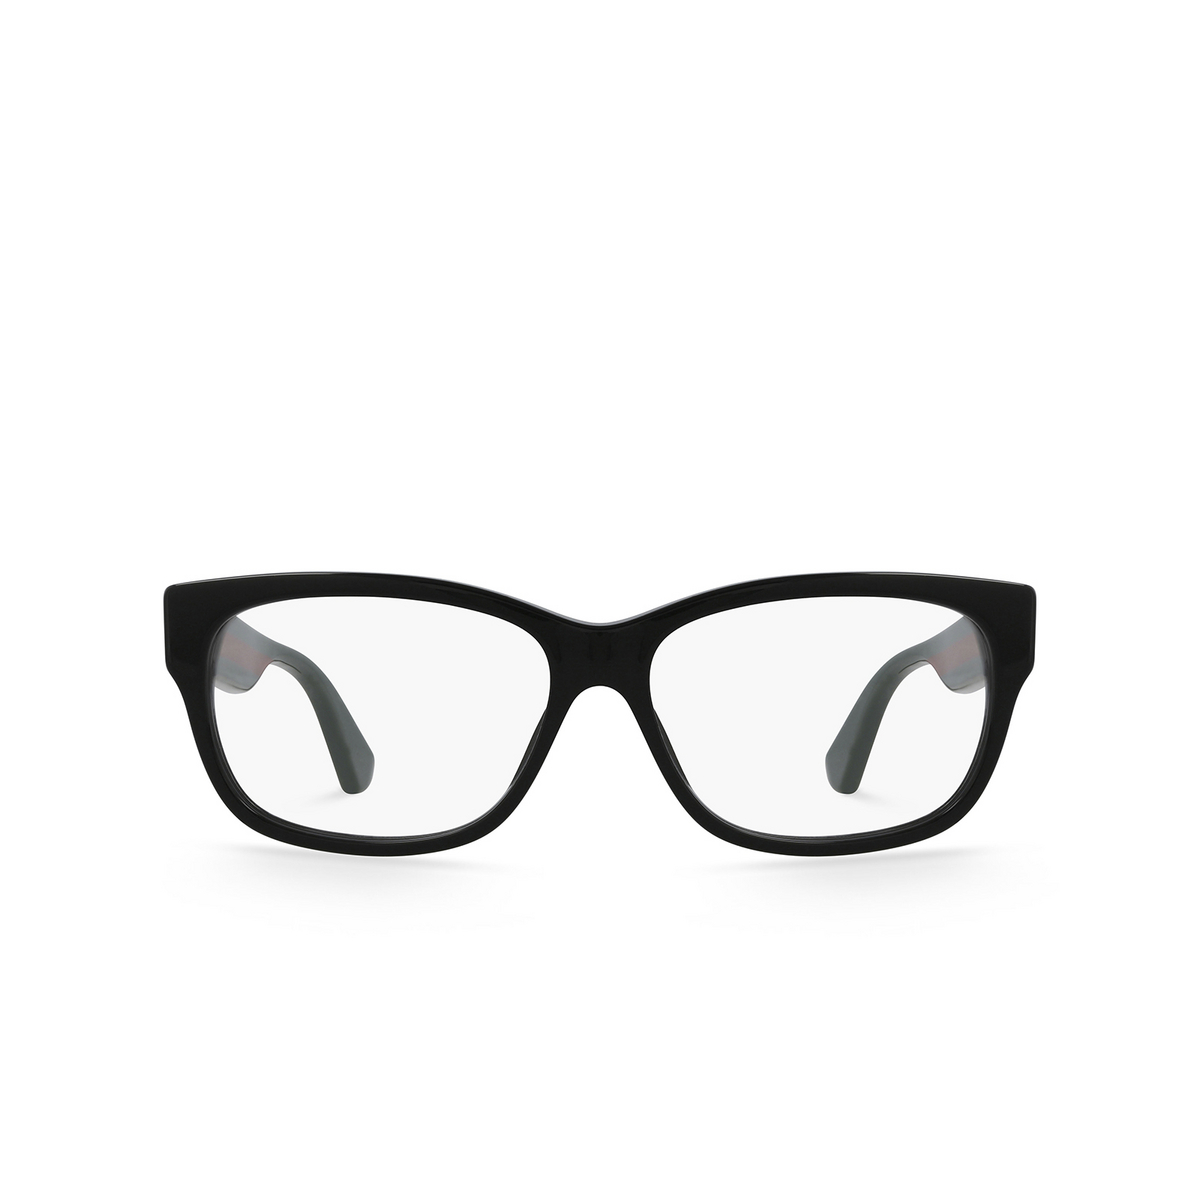 Gucci® Rectangle Eyeglasses: GG0278O color Black 011 - front view.